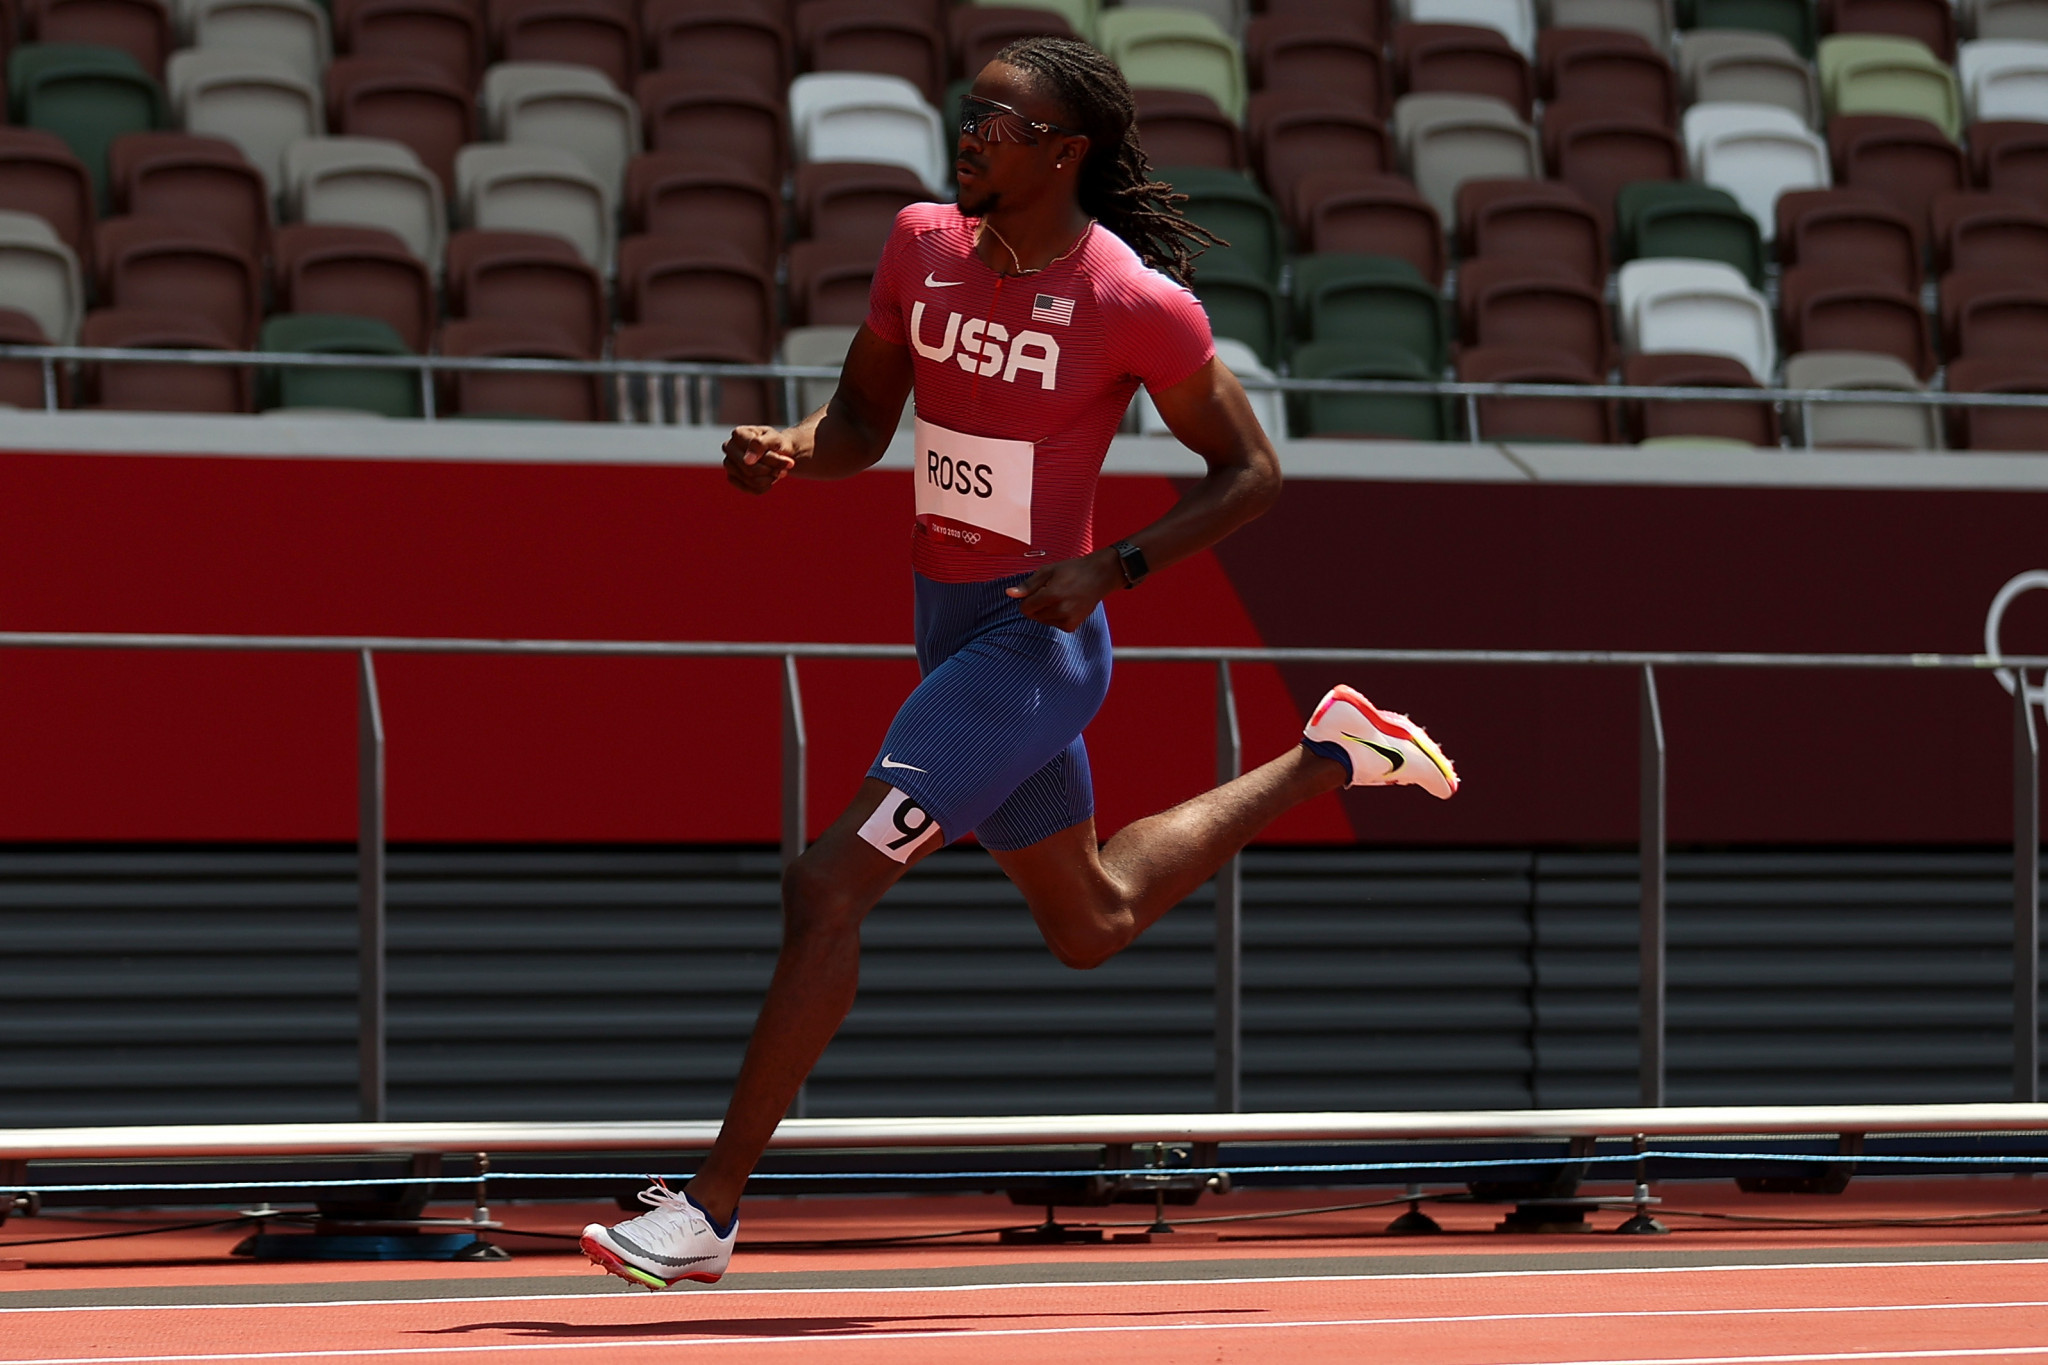 Randolph Ross featured as part of the United States 4x400 metres relay team at the Tokyo 2020 Olympics, running in the heats but not the final ©Getty Images